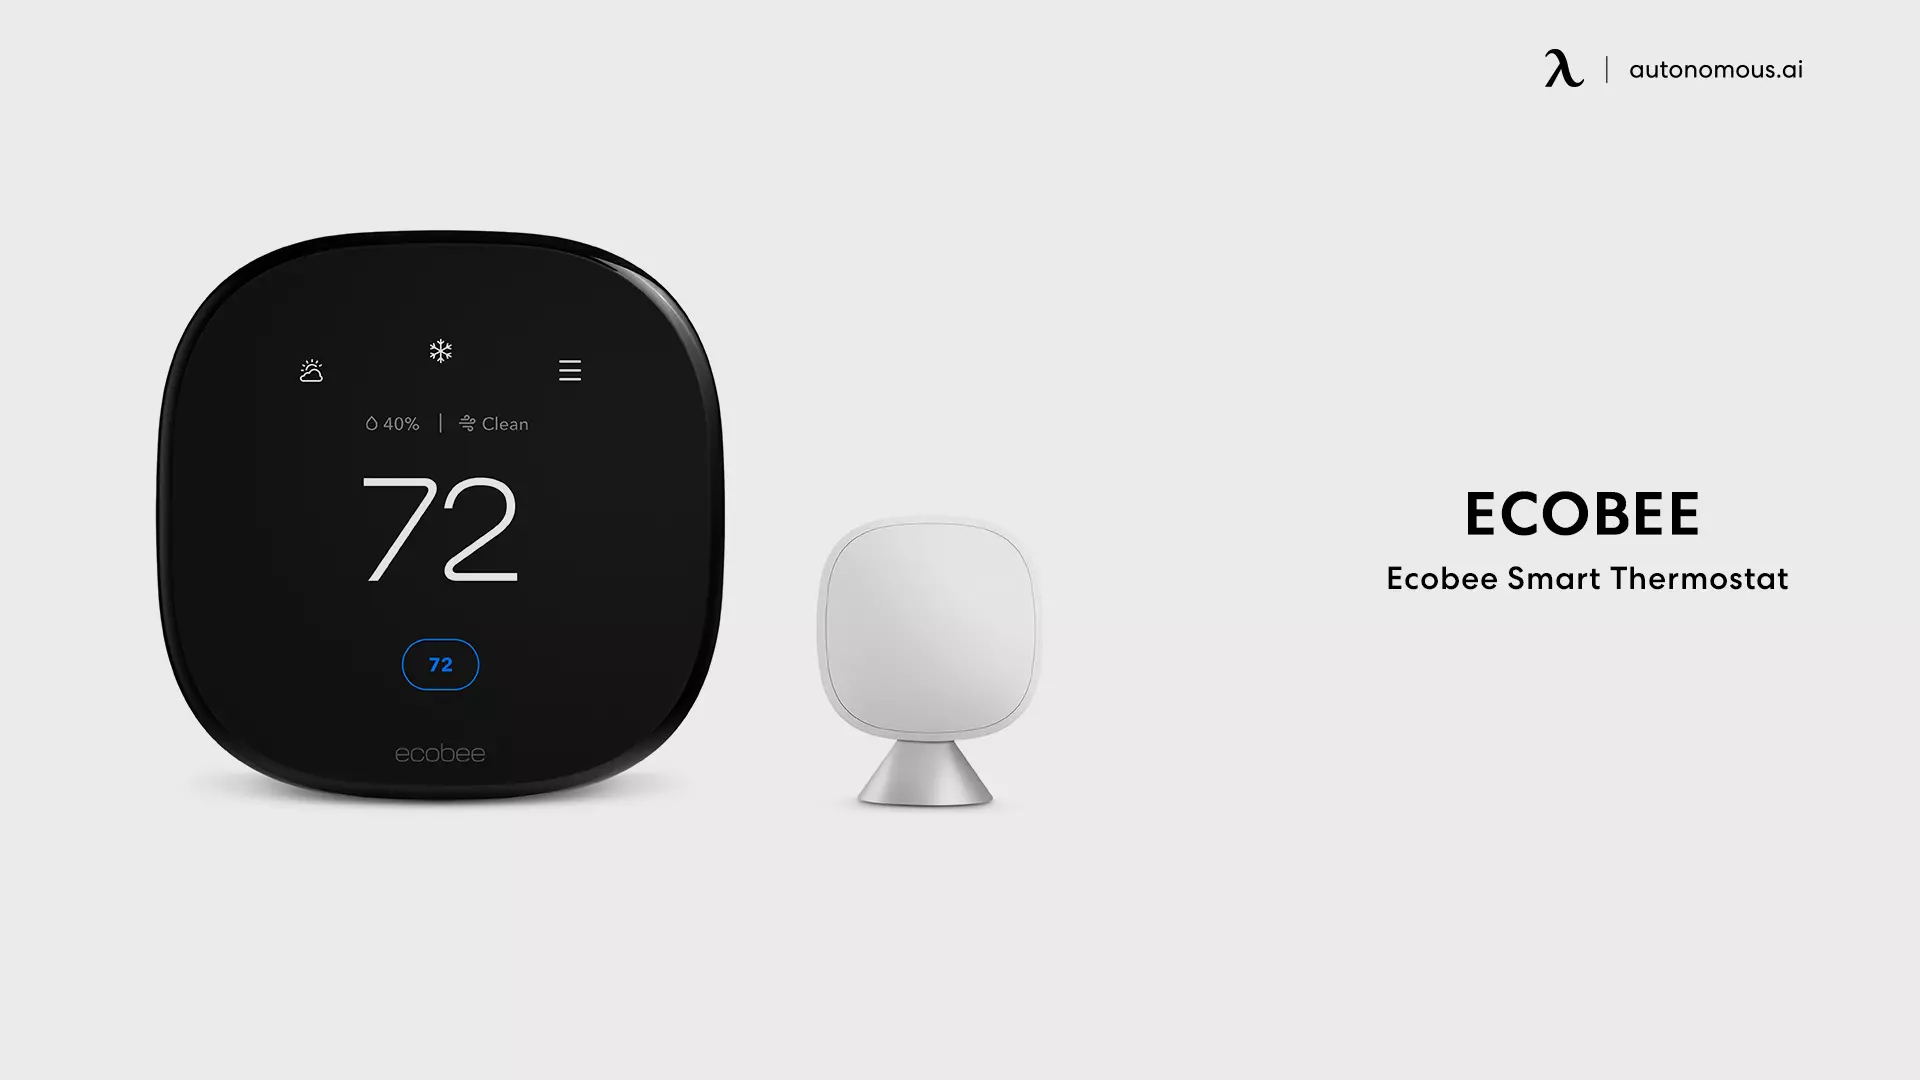 Ecobee Smart Thermostat - smart home gadgets